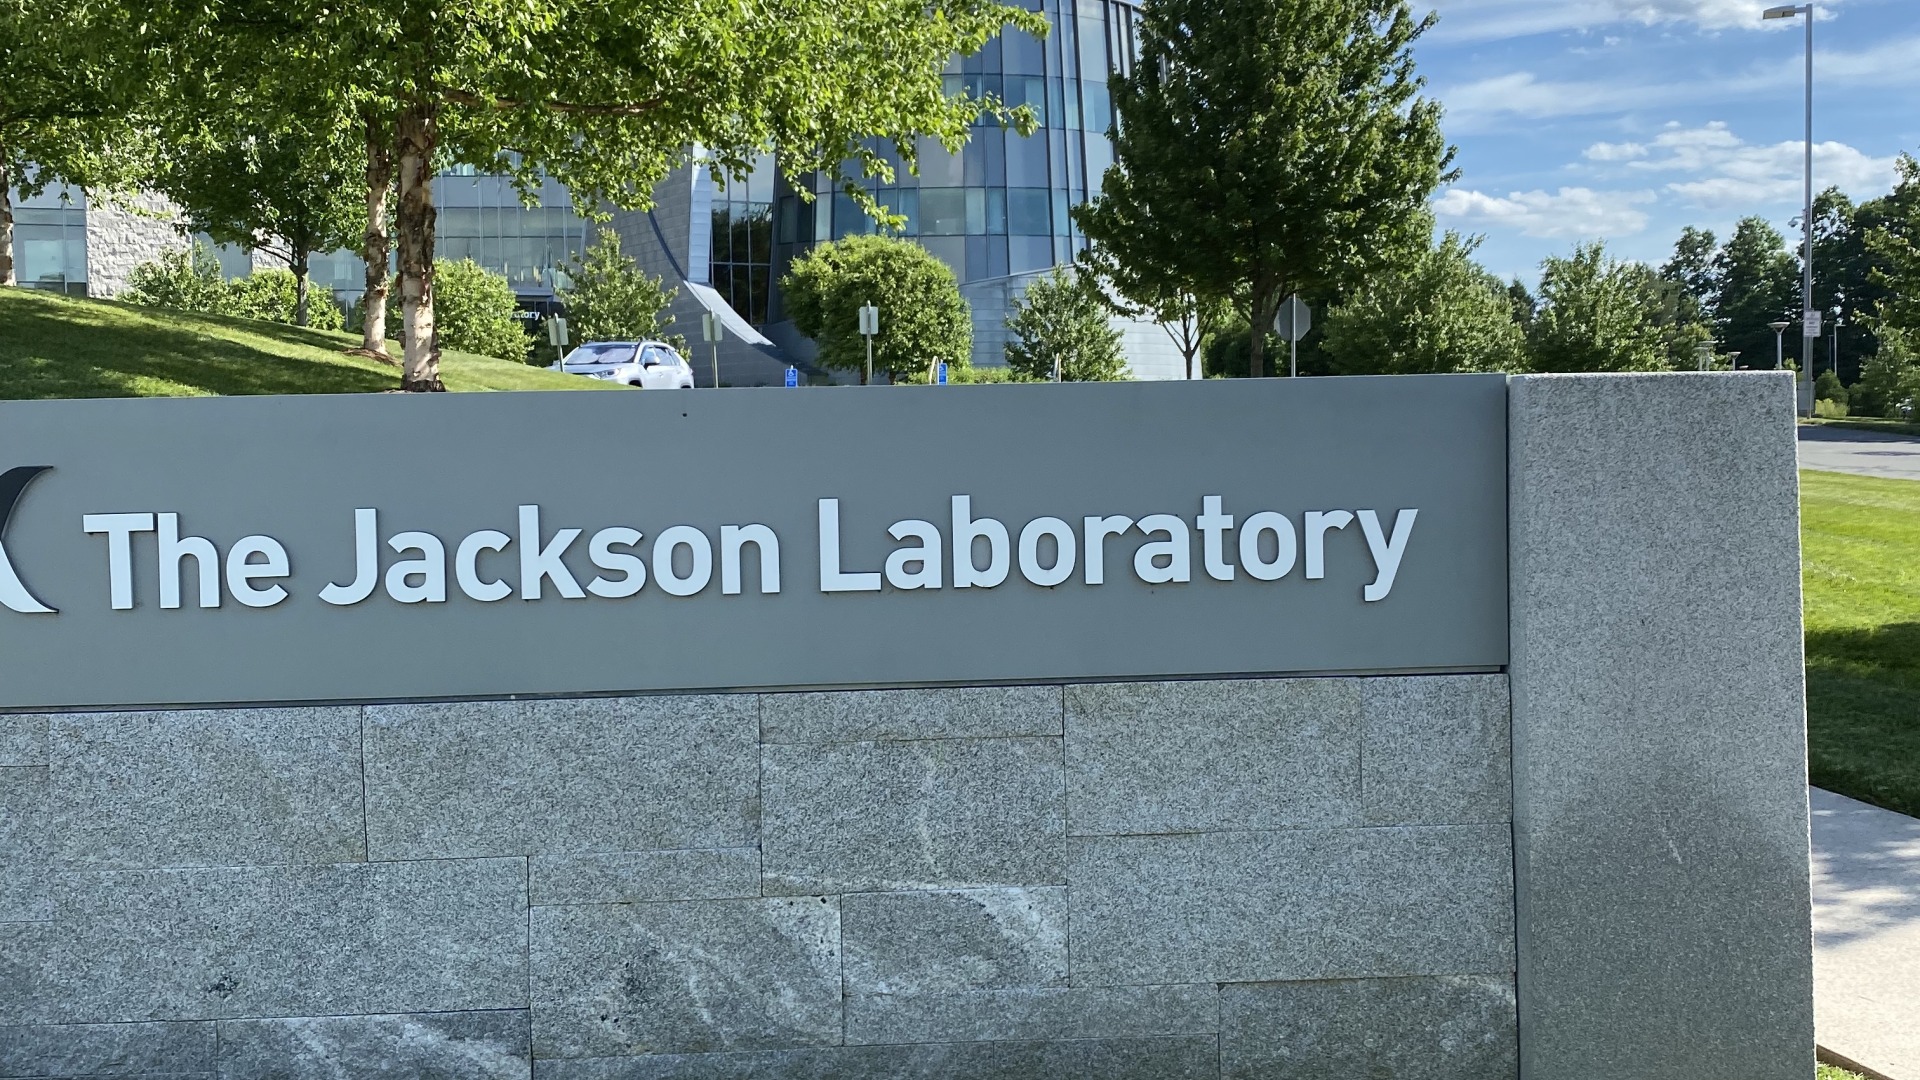 The Jackson Laboratory sign with green grass surrounding the sign.